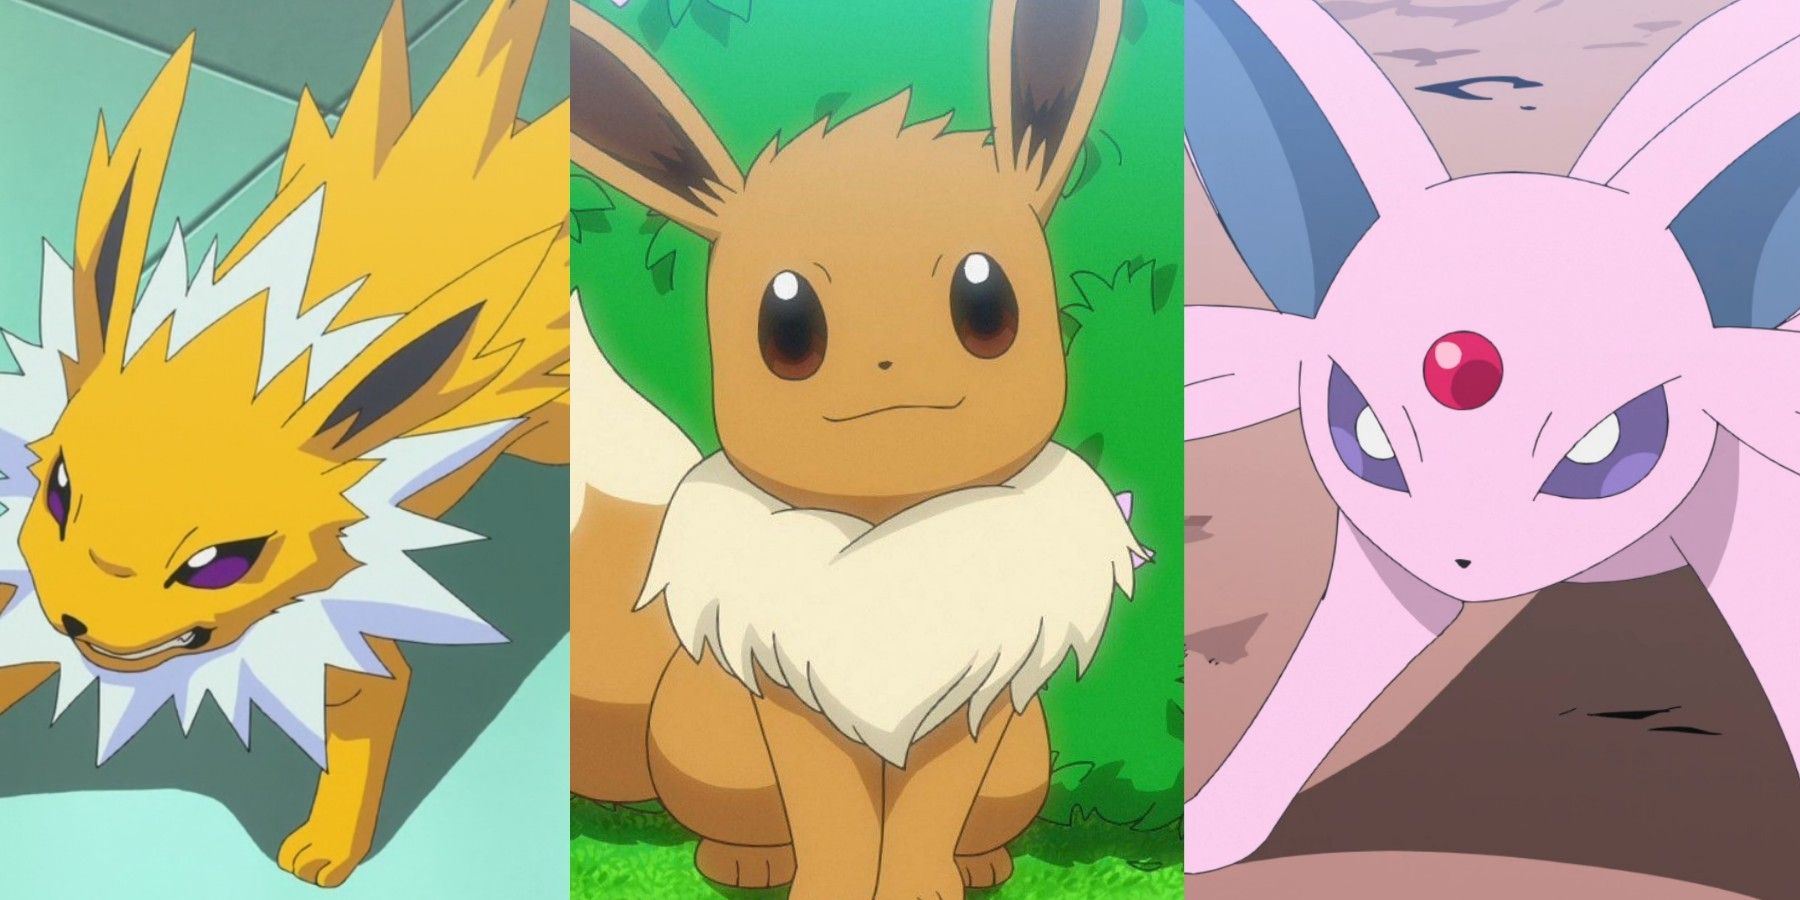 Pokémon: What The Best Eevee Evolution Actually Is